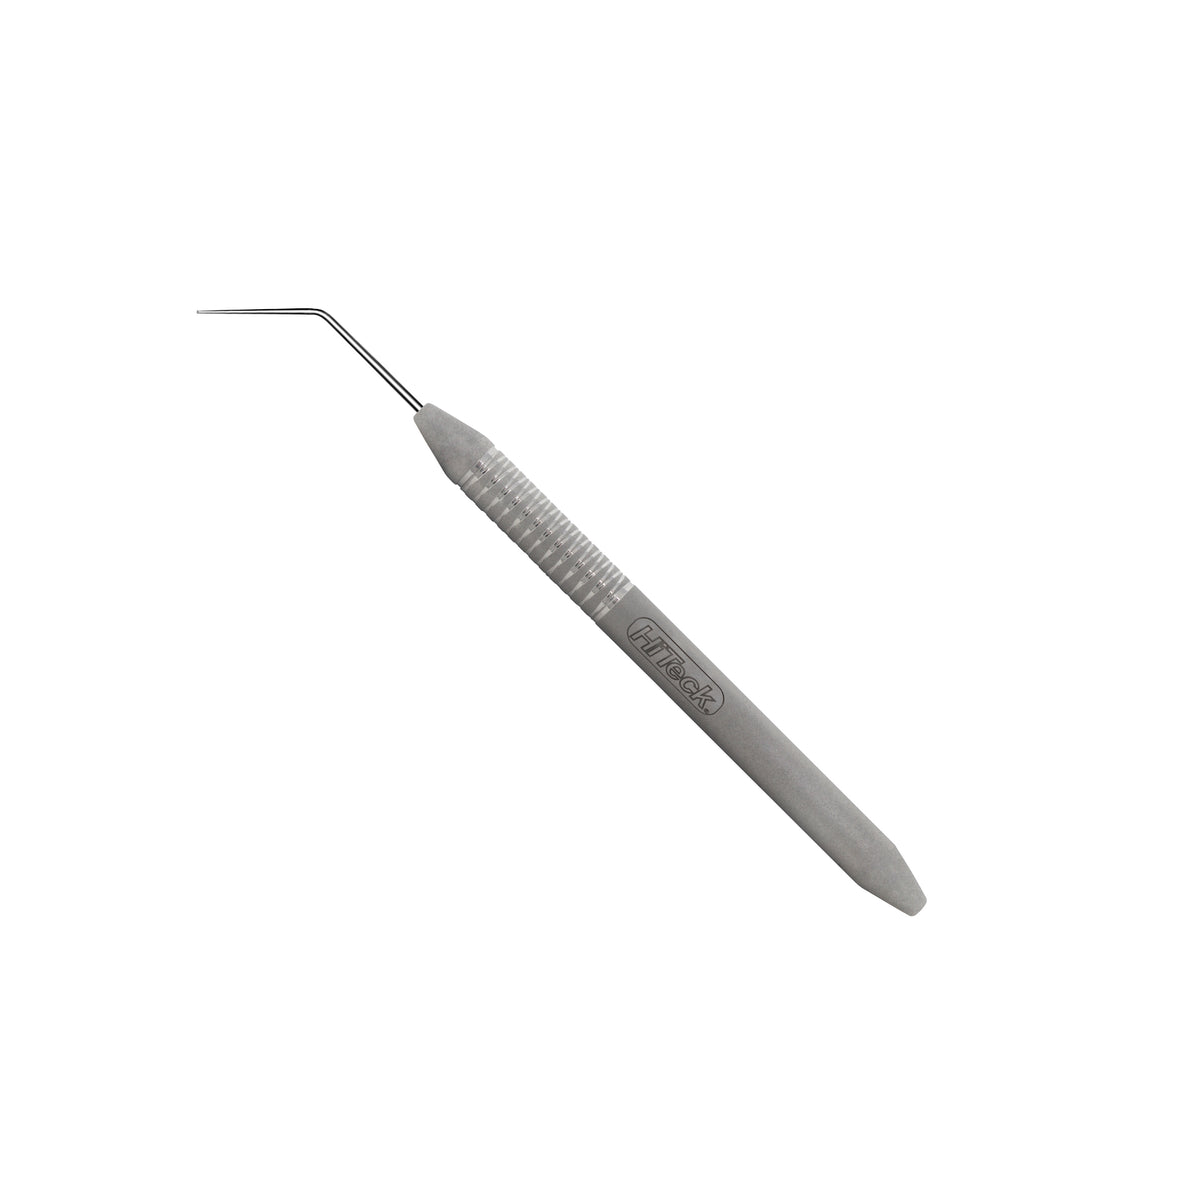 L2, 0.50MM, 18 MM LUKS Root Canal Plugger - HiTeck Medical Instruments